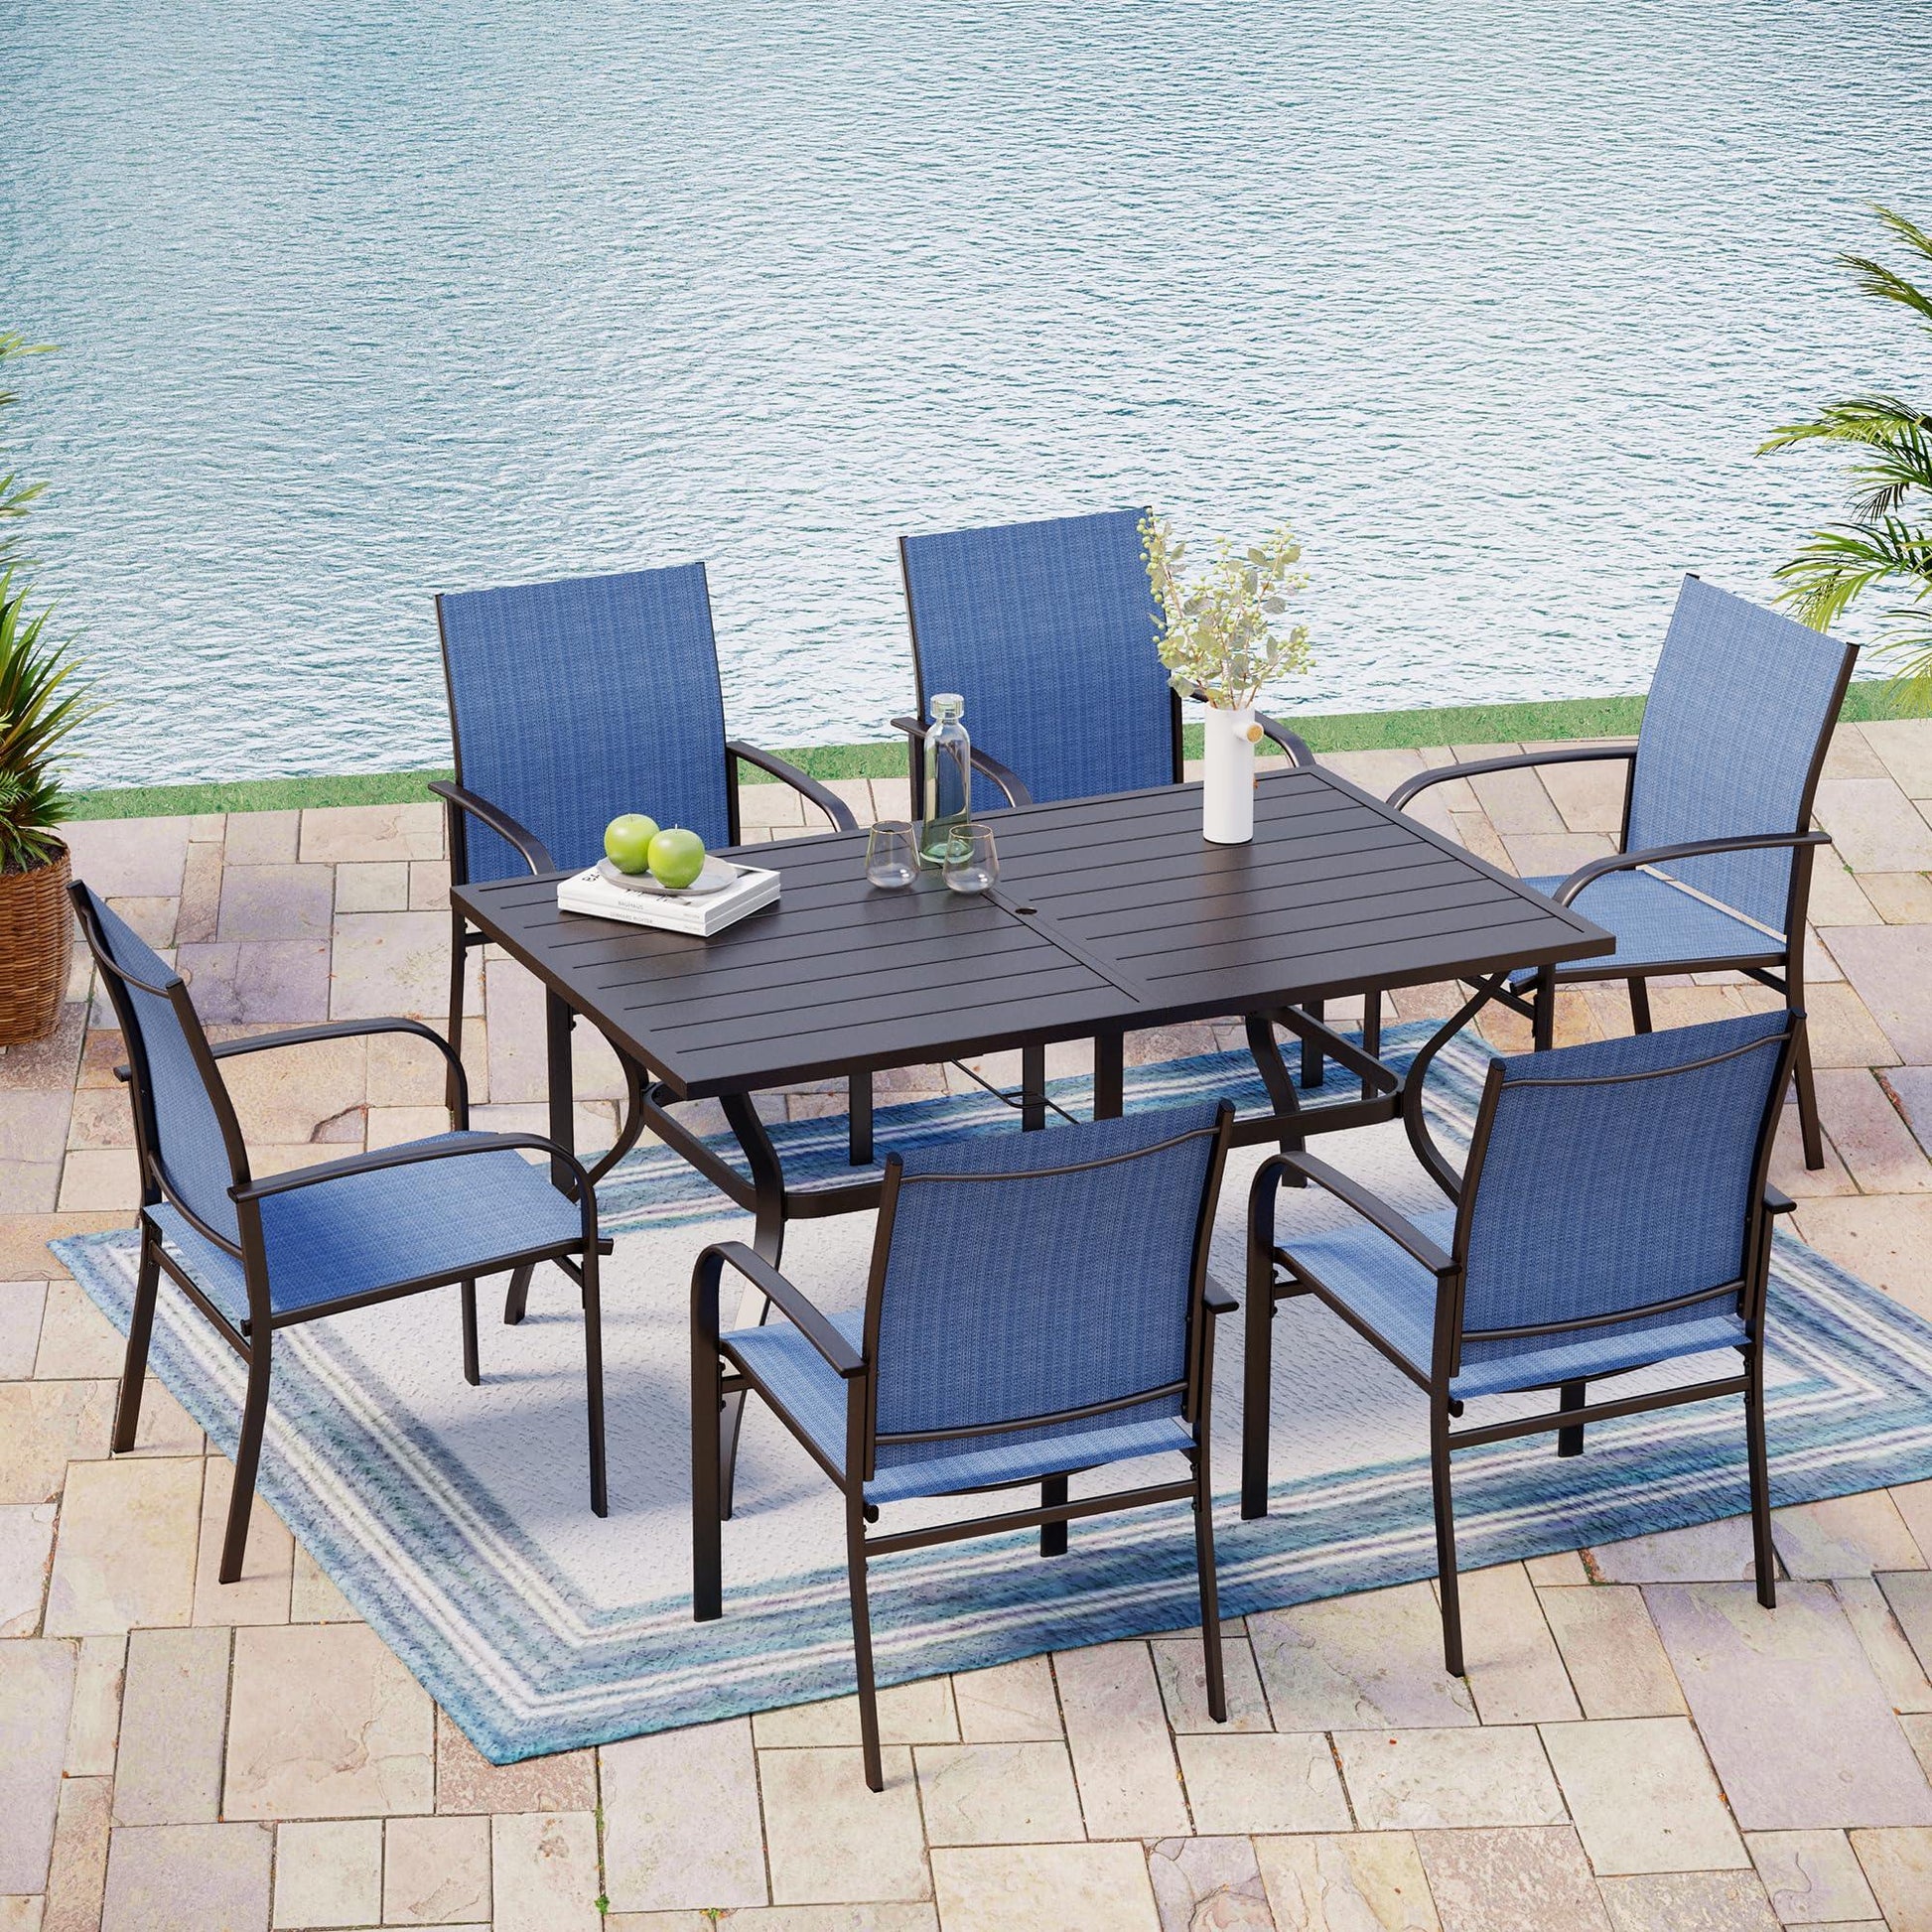 MIXPATIO Outdoor Patio Dining Set 7 Piece Furniture Set with 6 Blue Textilene Chairs and Metal Rectangular Table for Deck Garden Backyard Lawn Poolside - CookCave